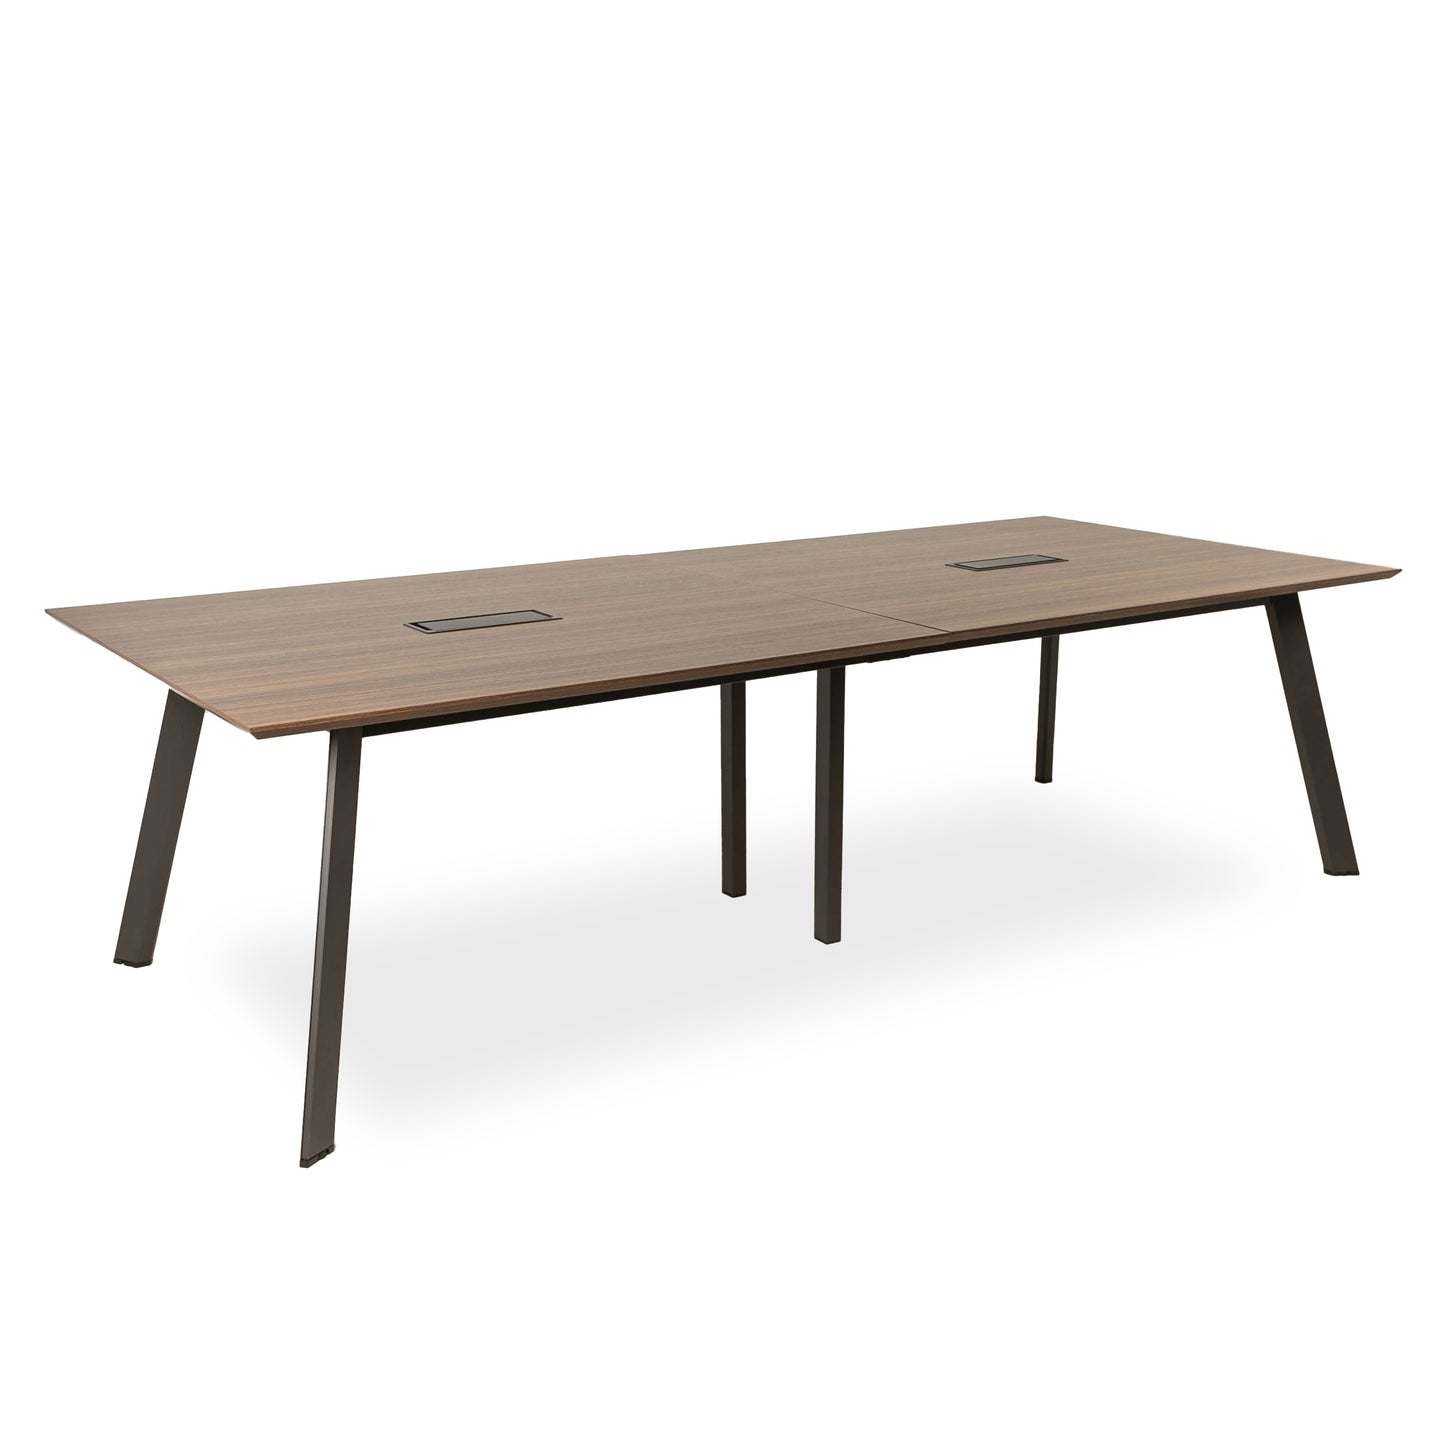 Load image into Gallery viewer, A28 MEETING TABLE - ContractWorld Furniture